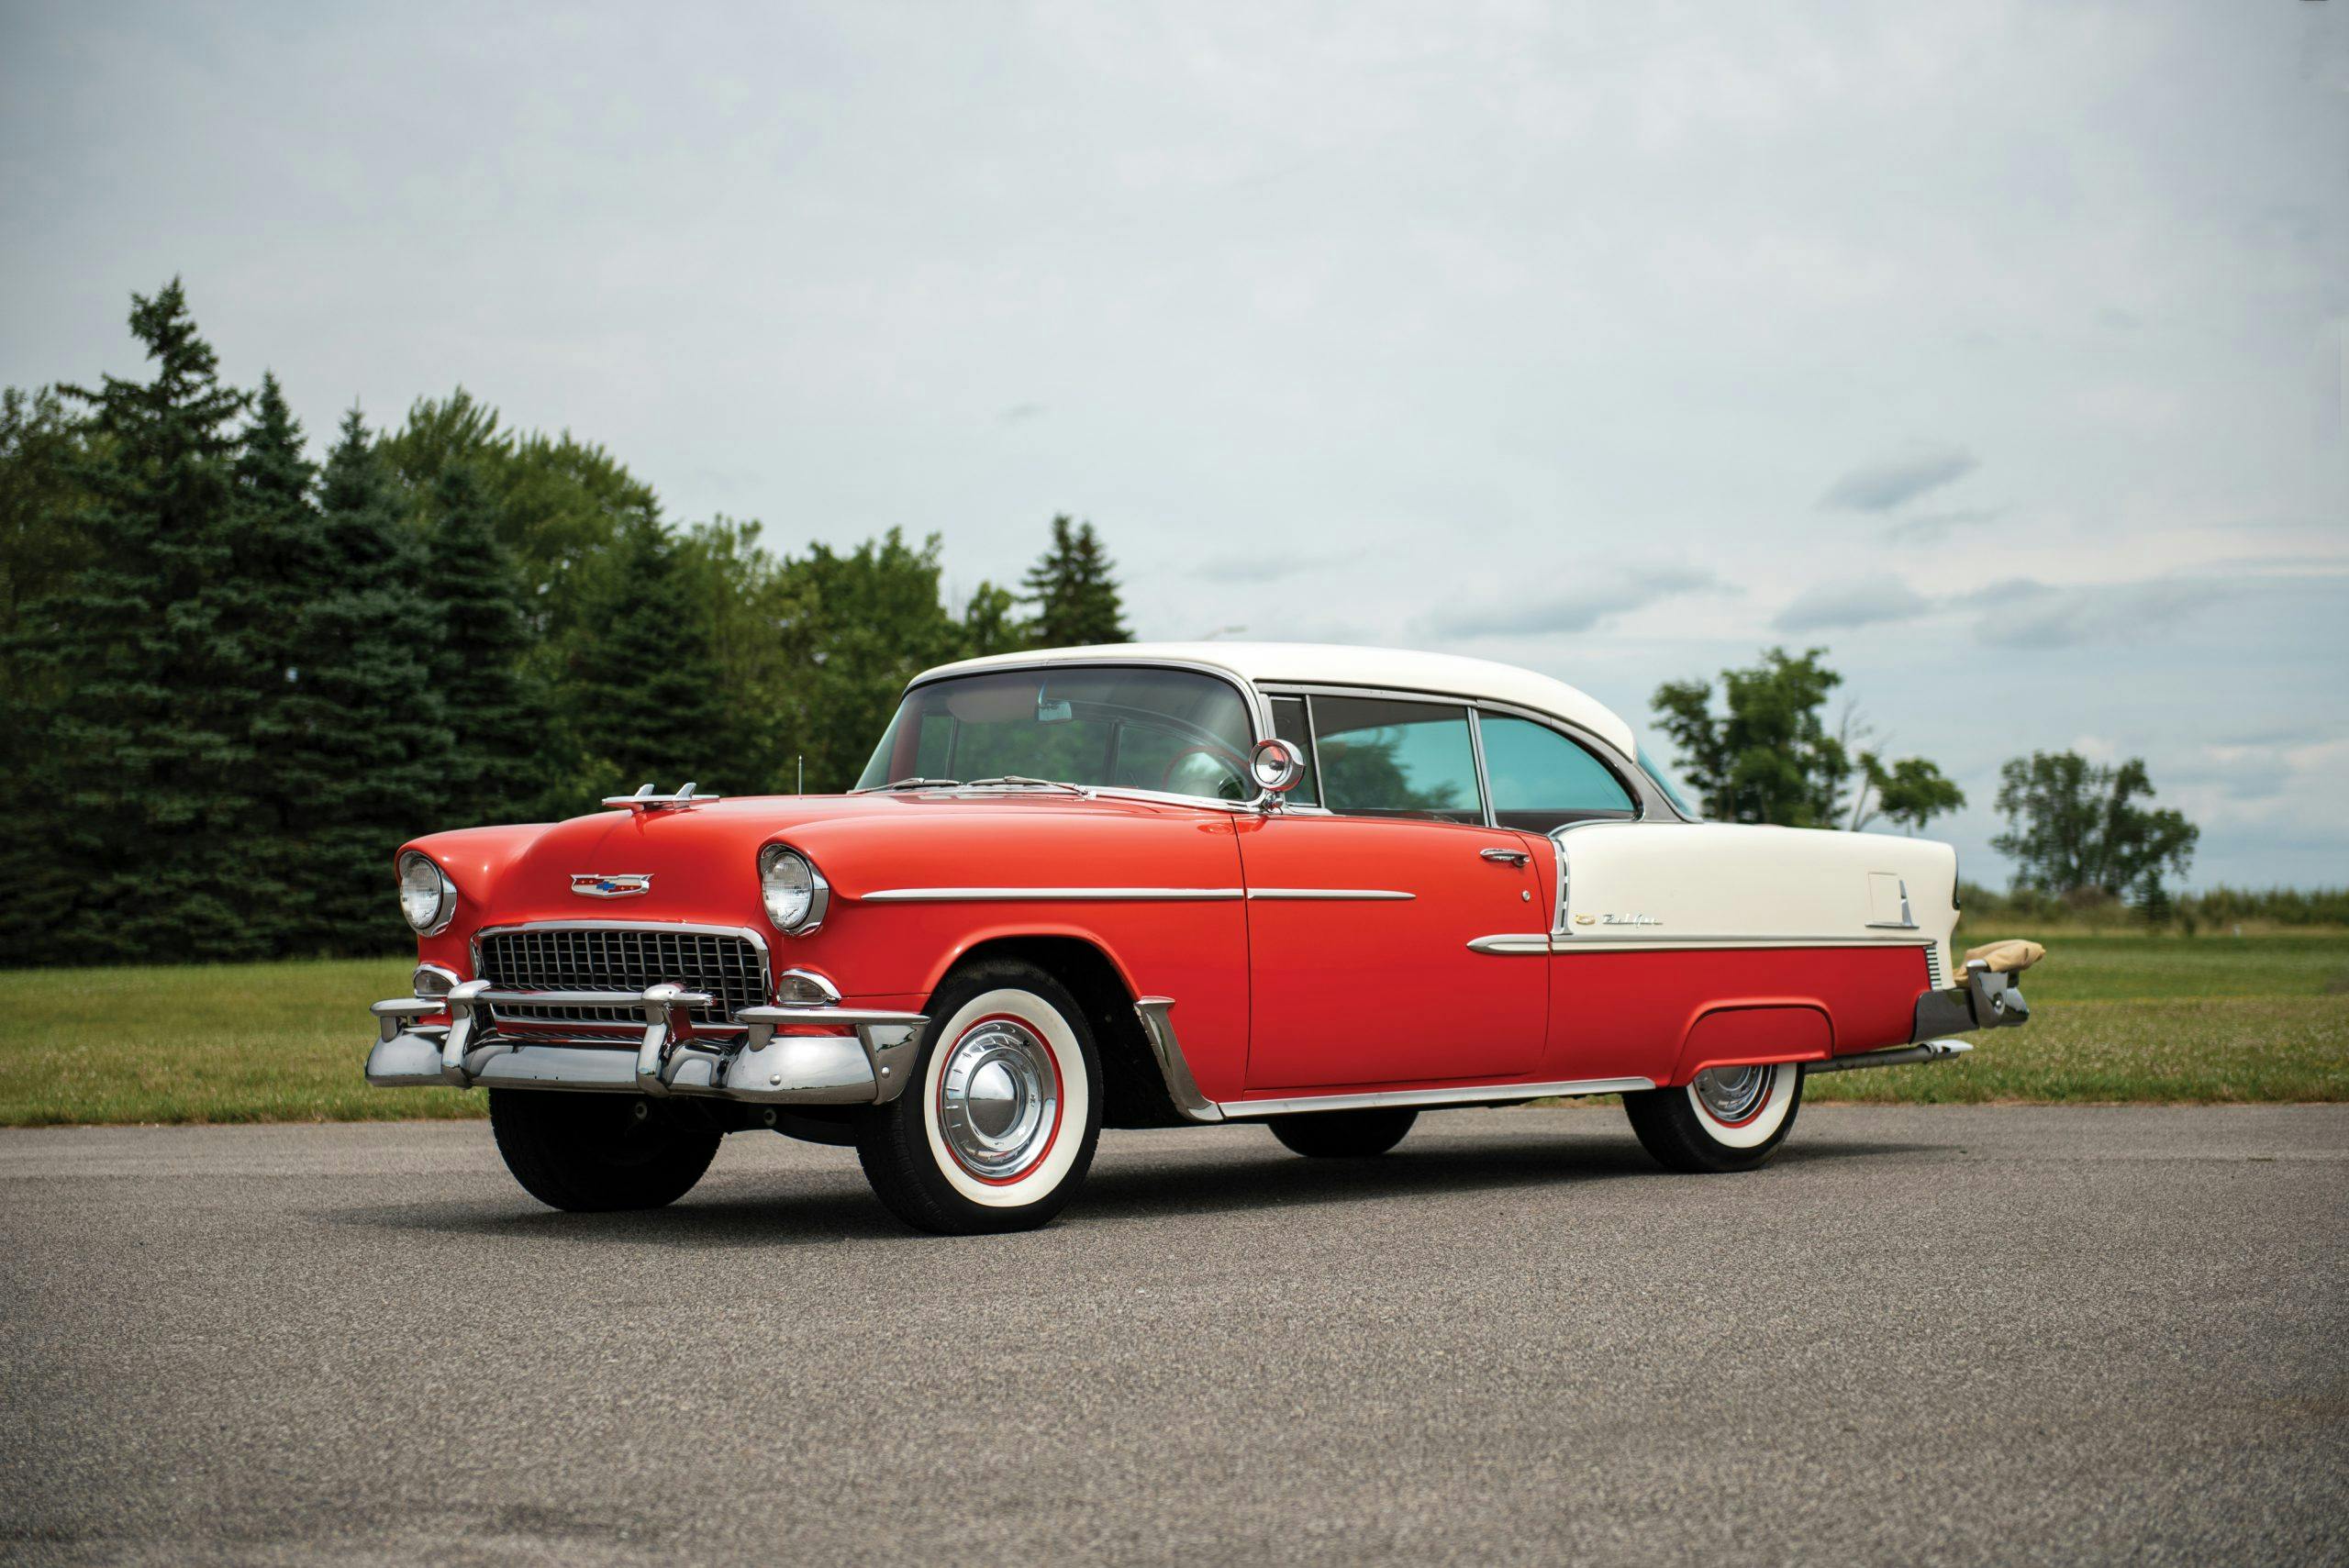 1955 Chevrolet Bel Air Coupe front three-quarter